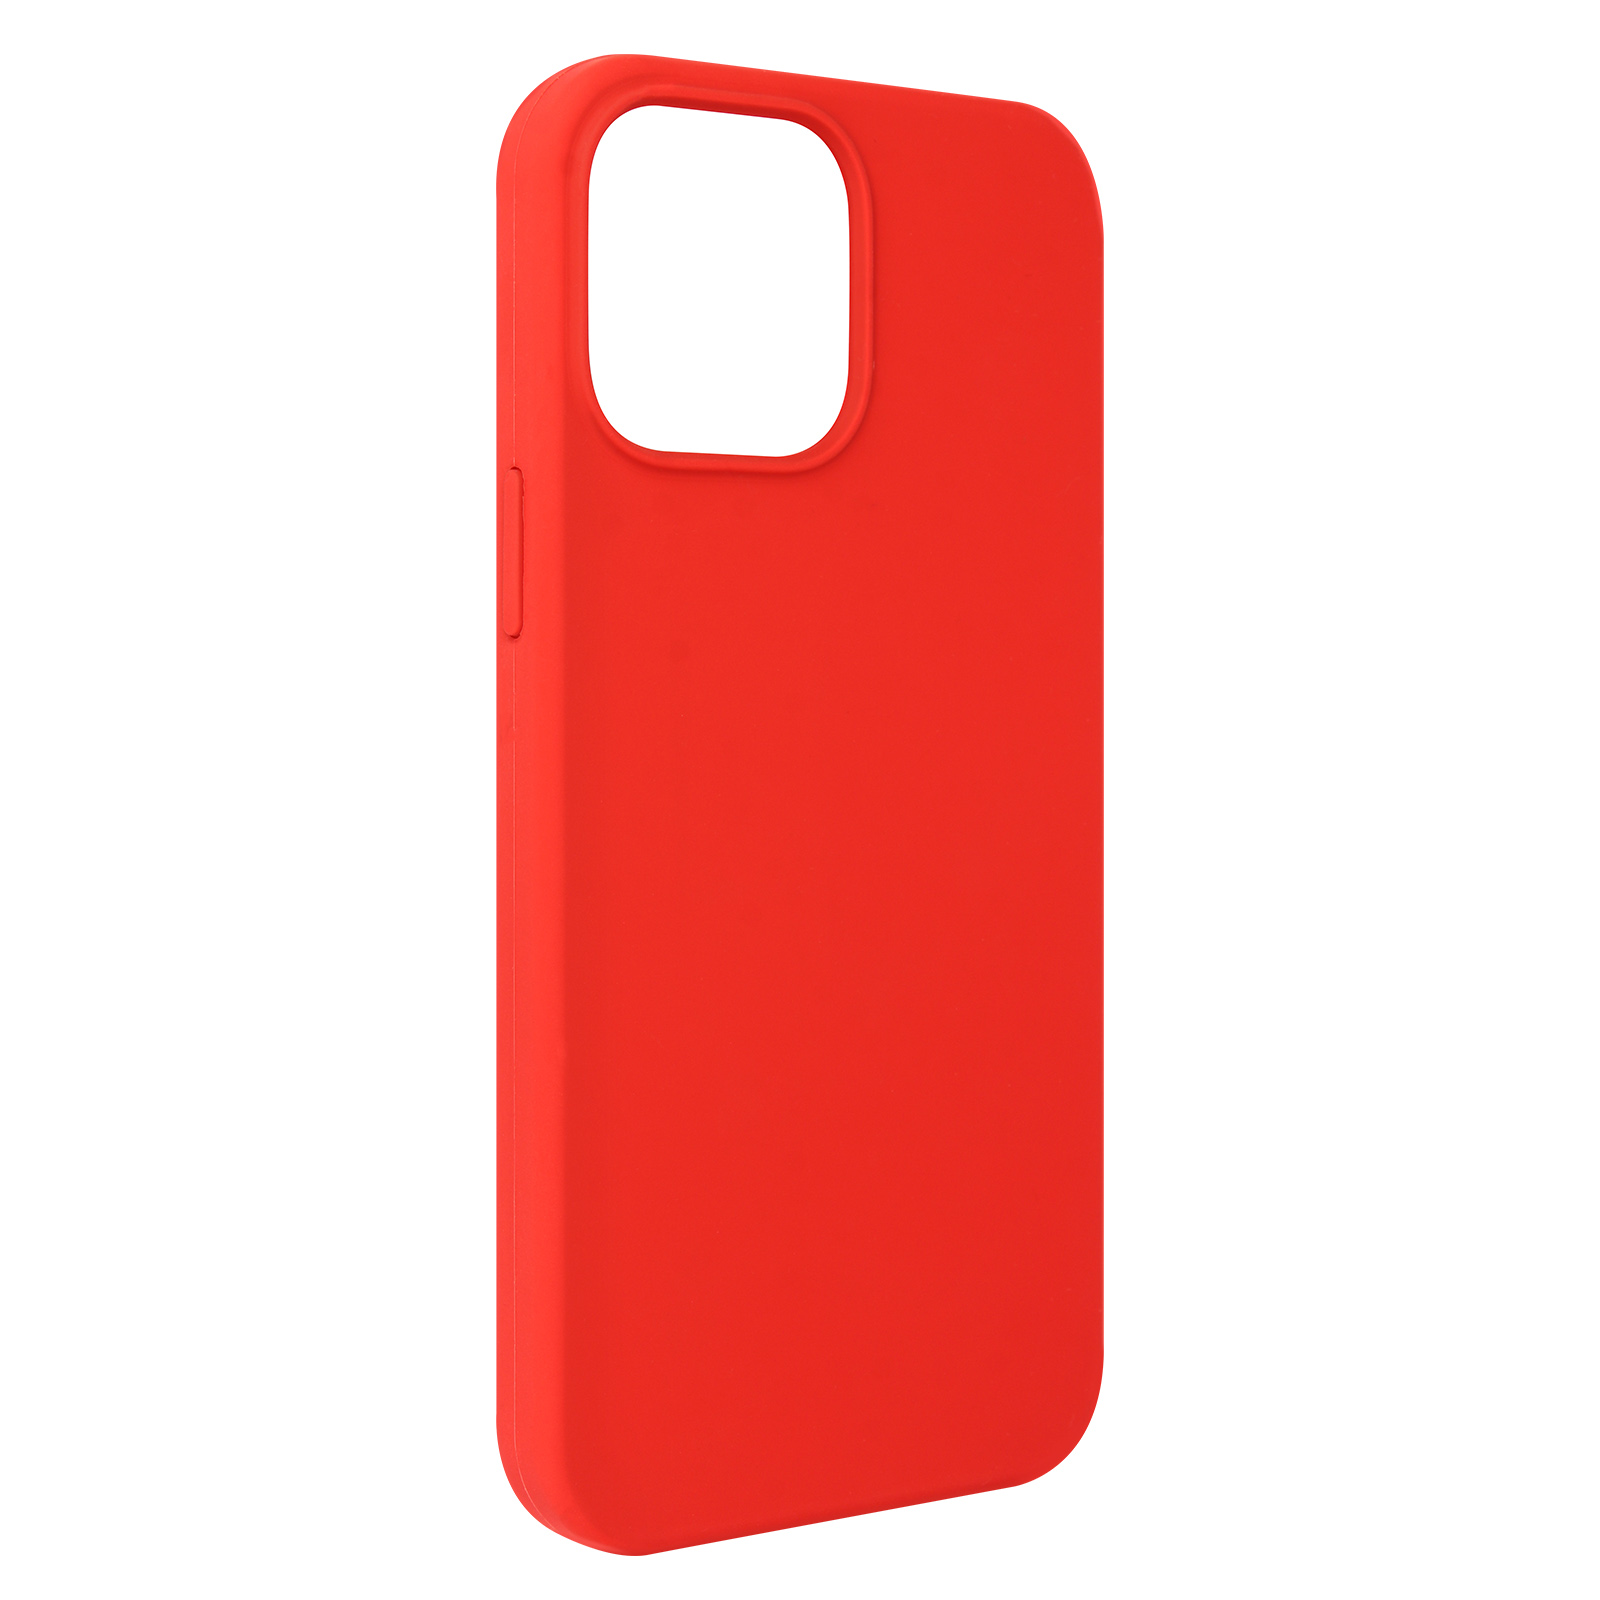 iPhone Apple, AVIZAR Likid Rot 13 Backcover, Pro, Series,